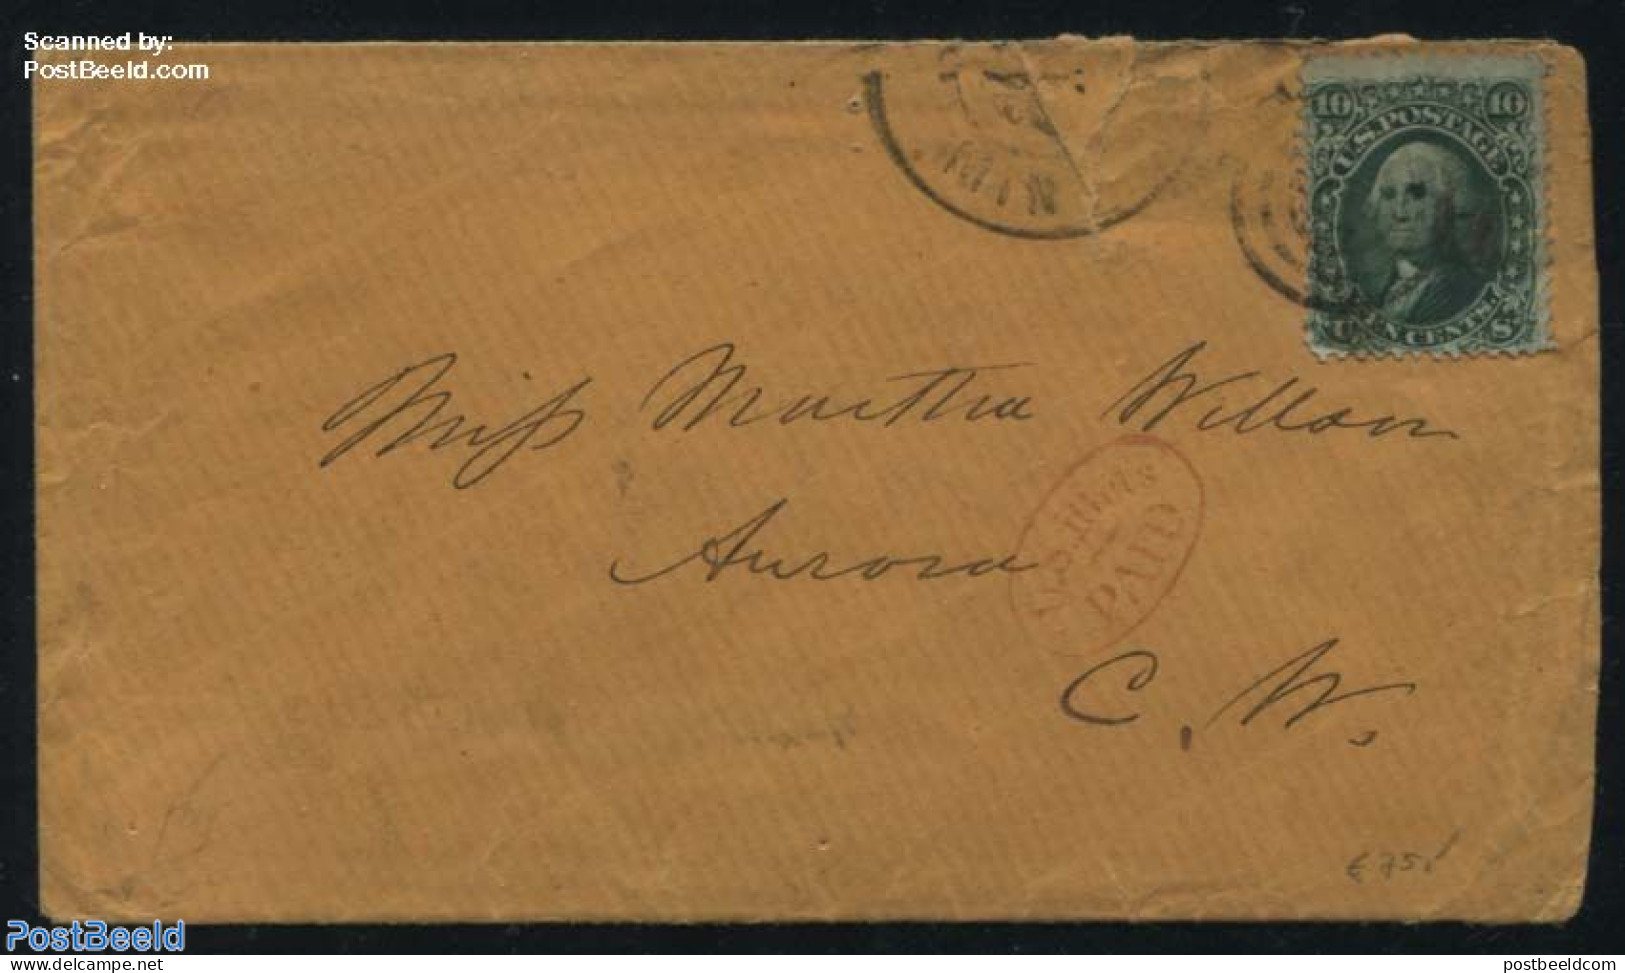 United States Of America 1864 Letter To Aurora With 10c Green, Postal History - Brieven En Documenten